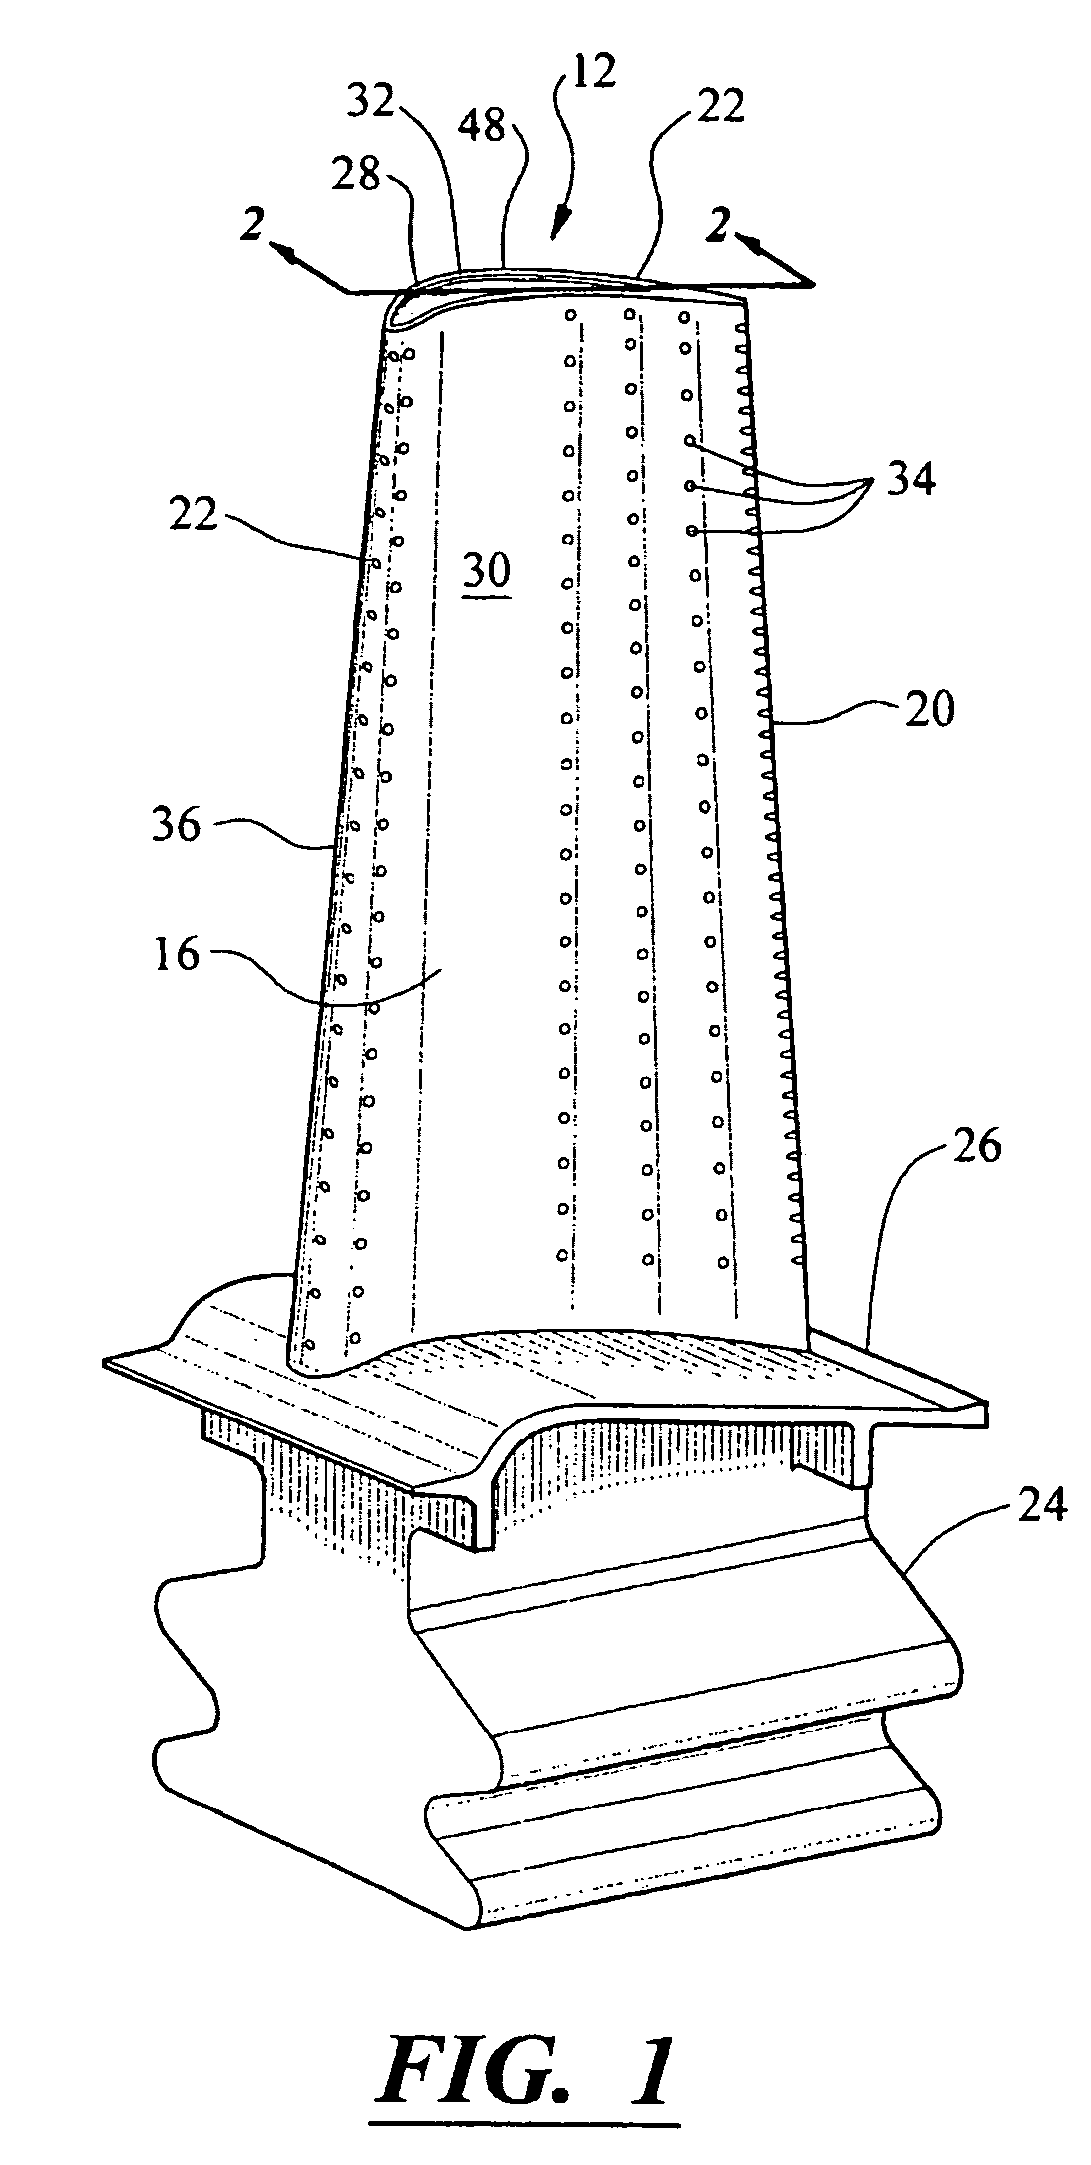 Turbine blade cooling system having multiple serpentine trailing edge cooling channels